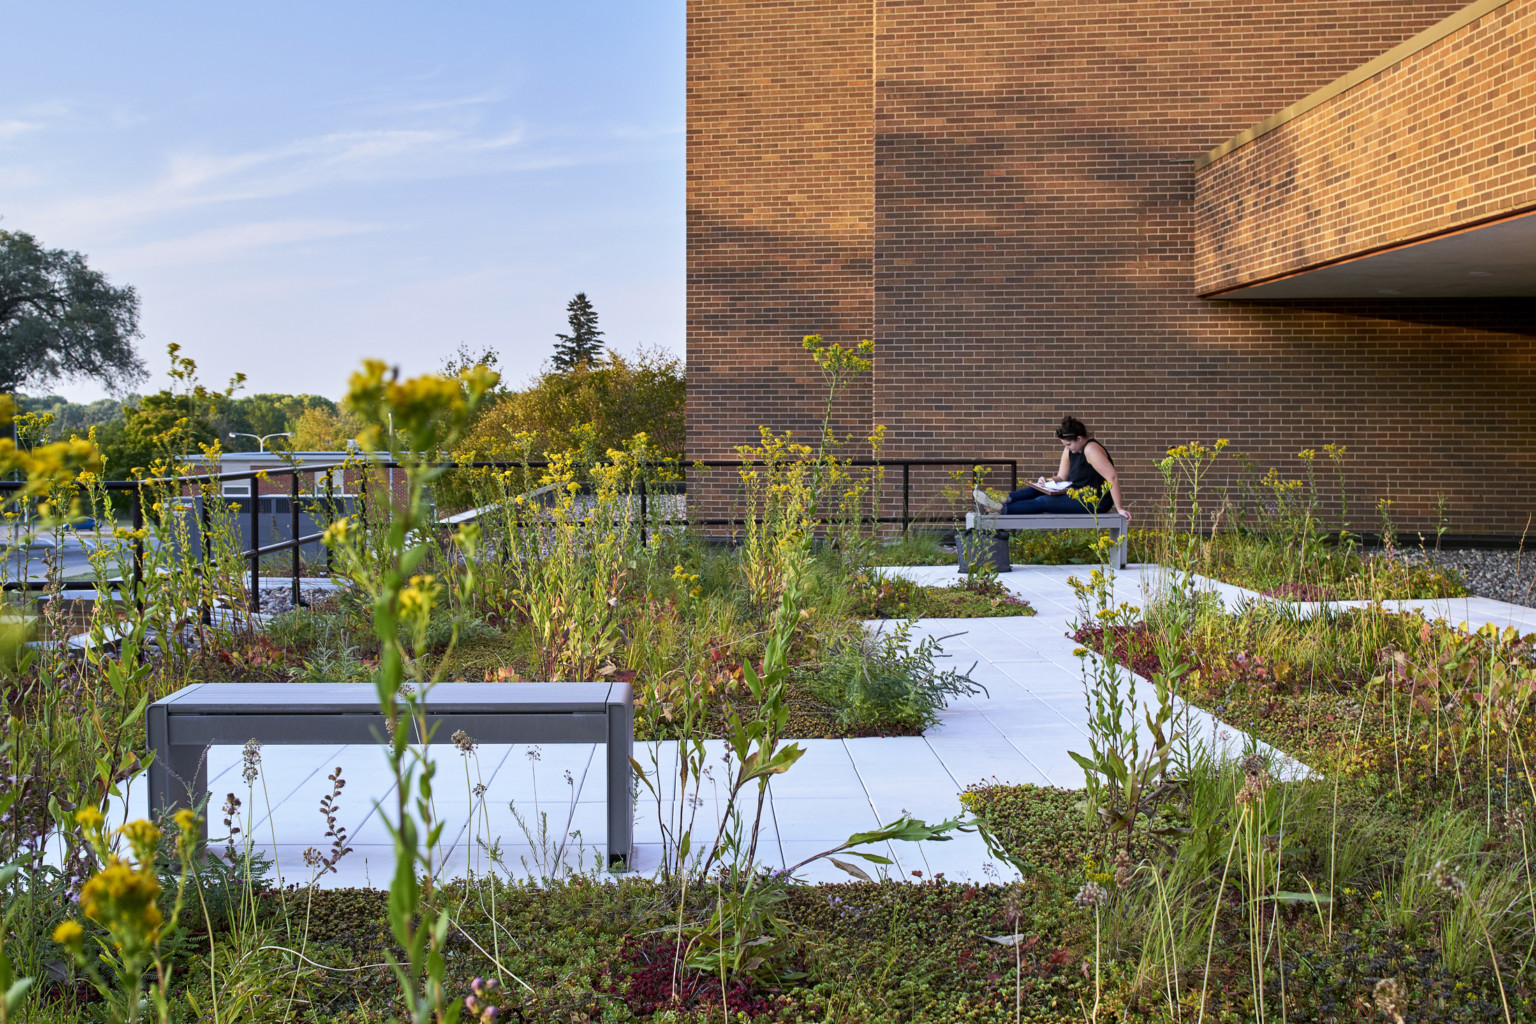 Rooftop garden with wildflowers and angular path at the University of Northern Iowa for students to go out and study on